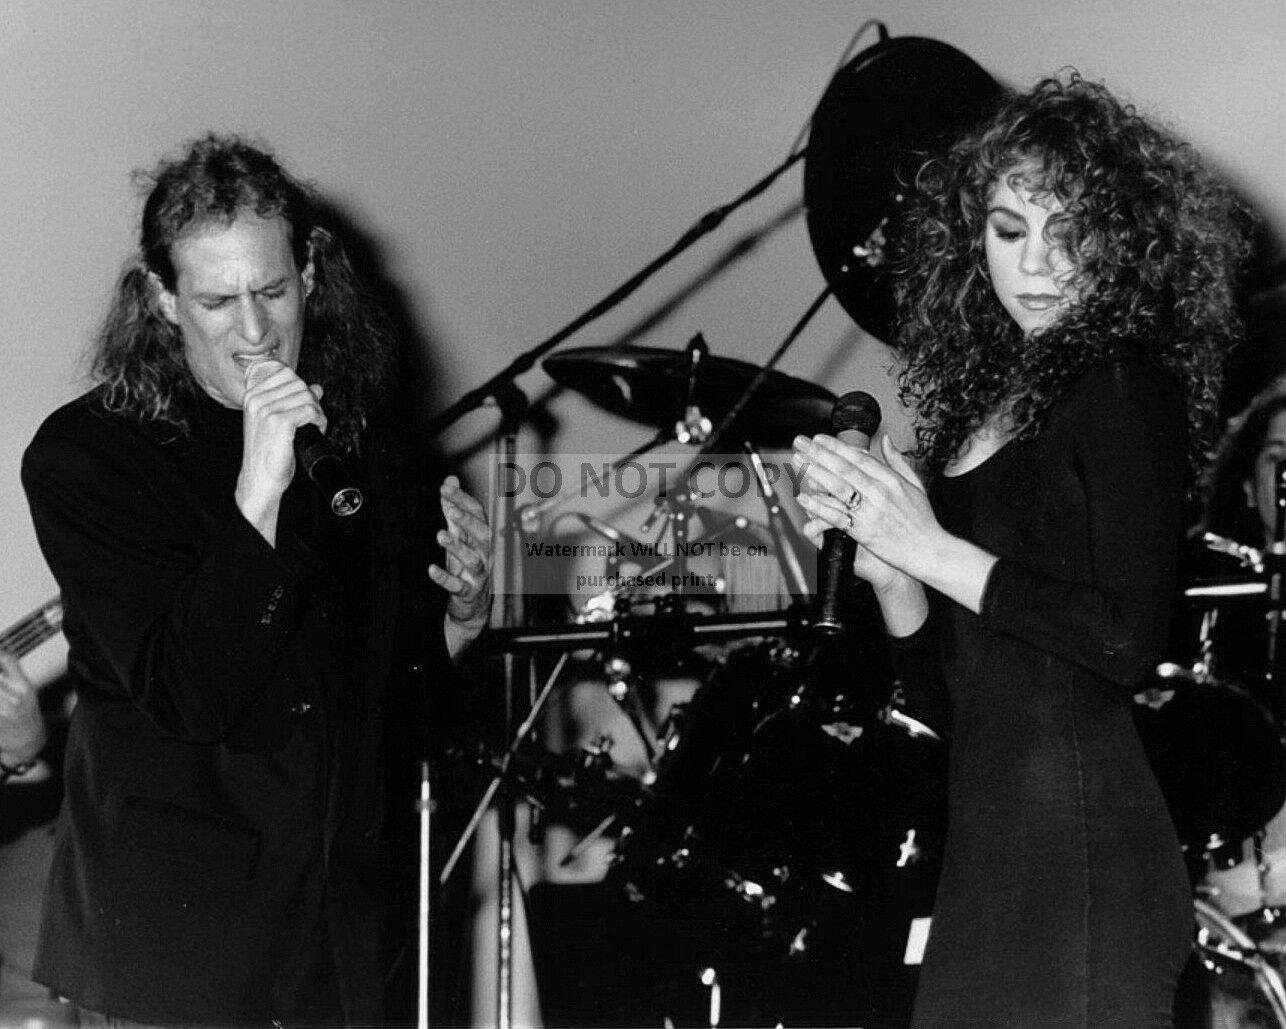 MICHAEL BOLTON AND MARIAH CAREY IN 1990 - 8X10 PUBLICITY PHOTO (BB-478)